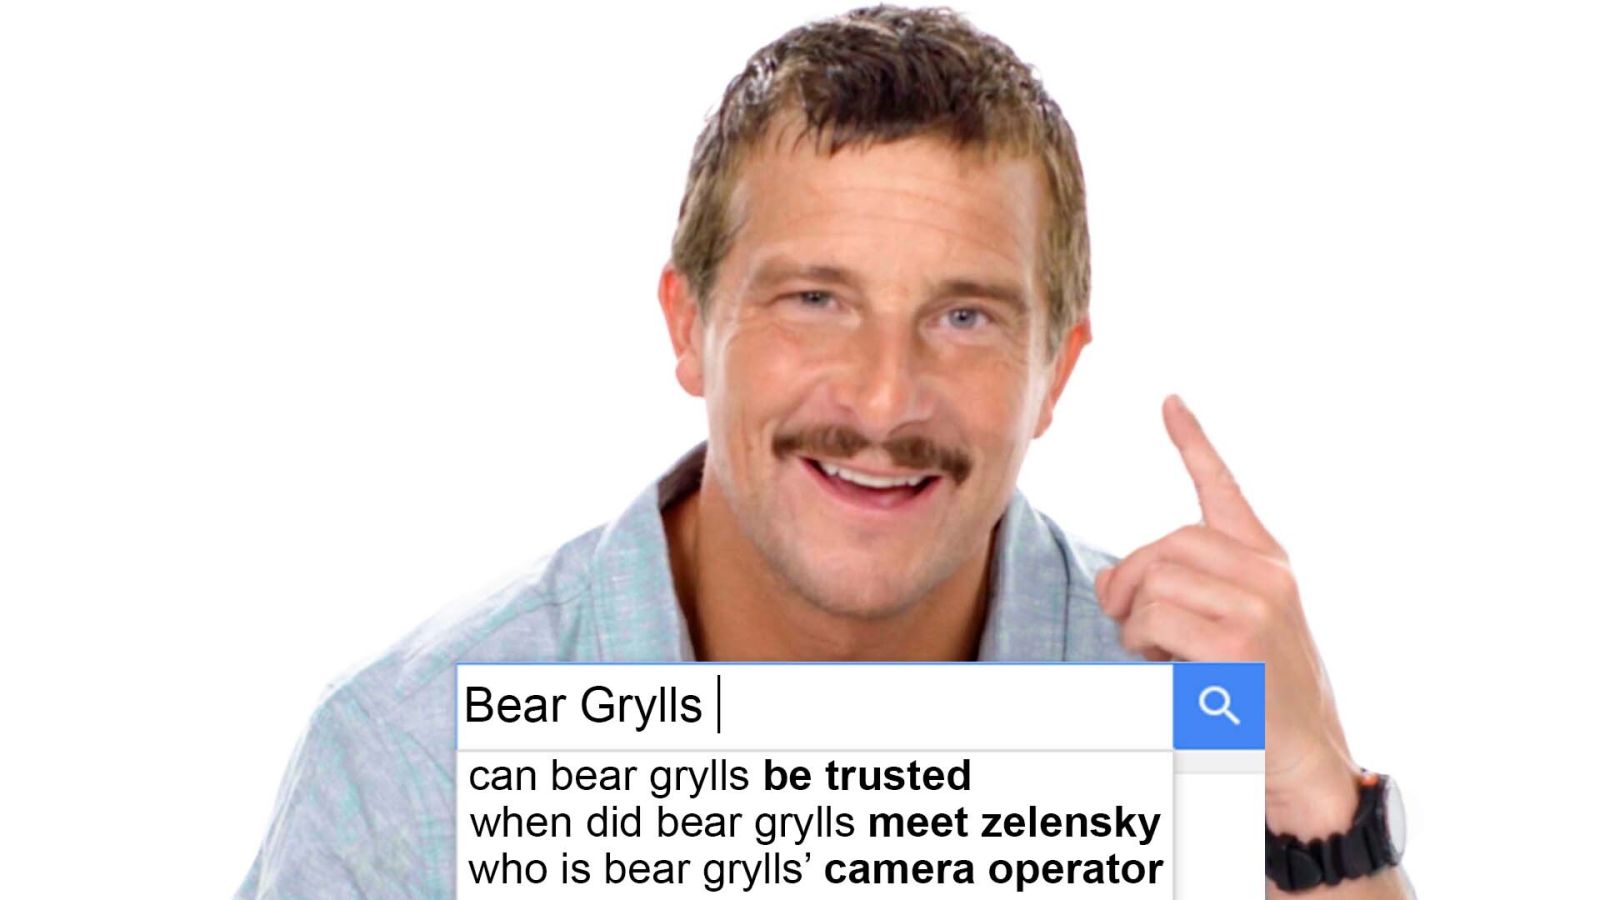 Bear Grylls Answers The Web's Most Searched Questions